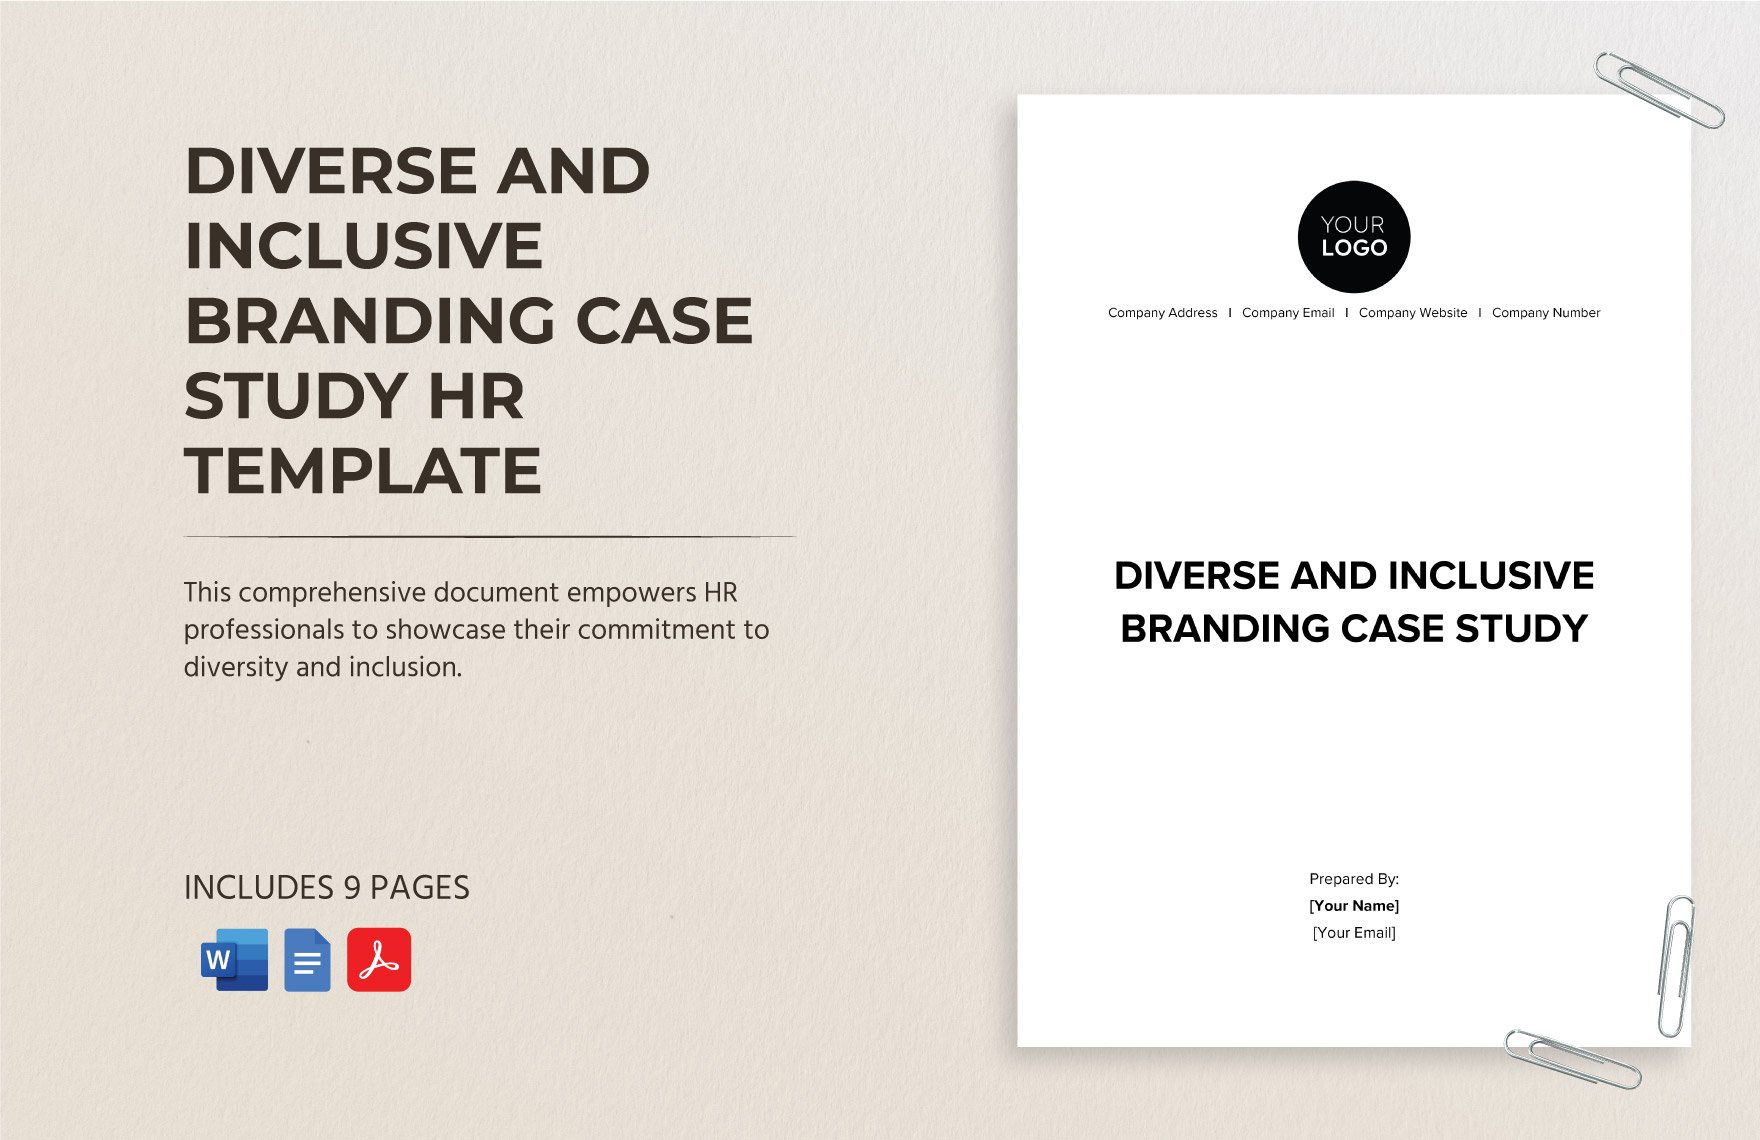 Diverse and Inclusive Branding Case Study HR Template